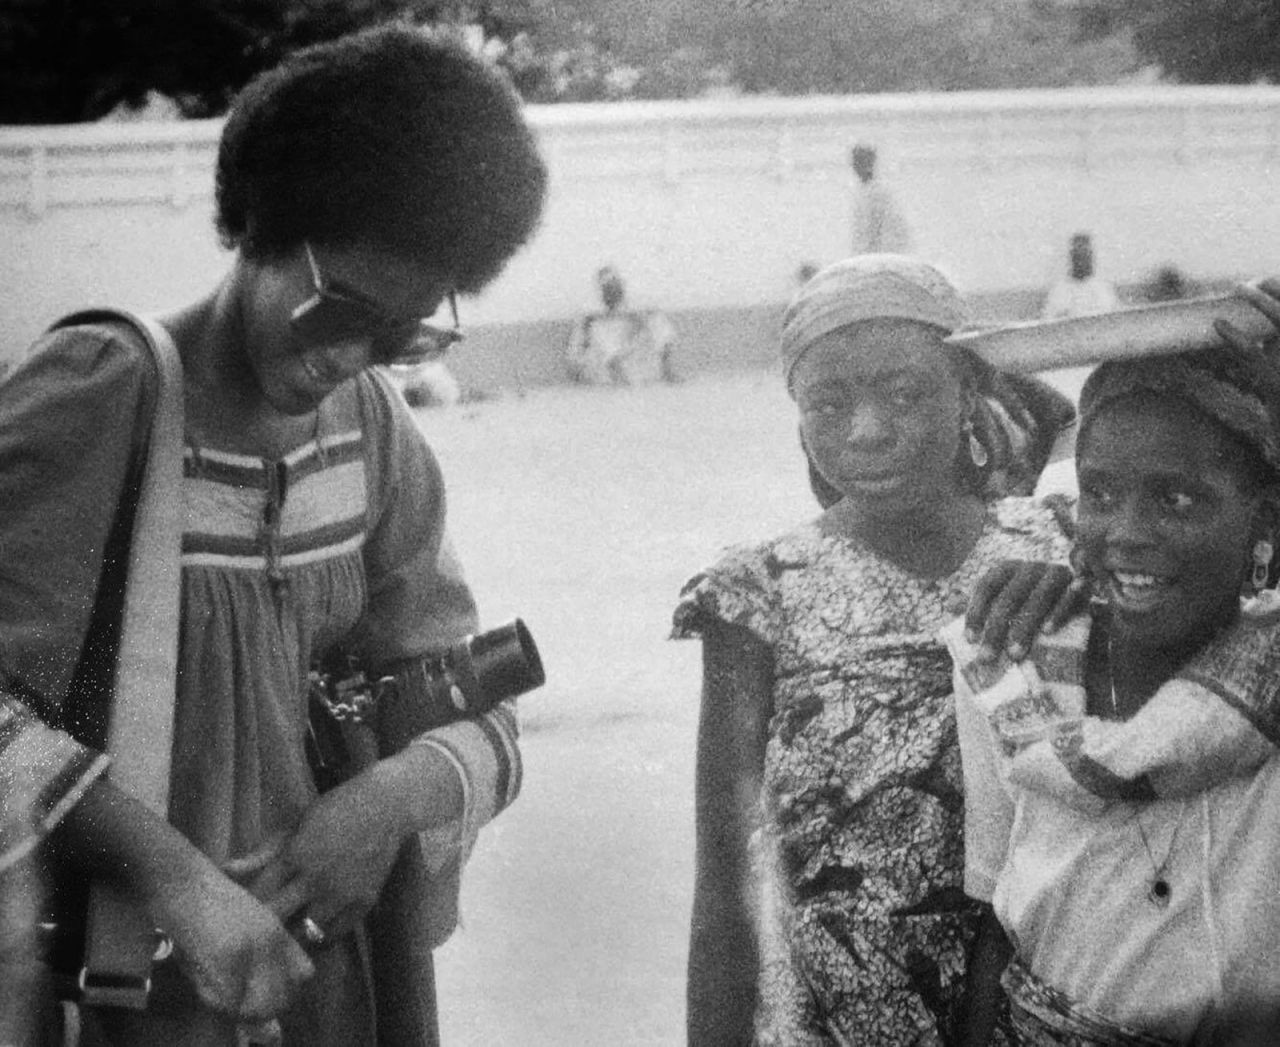 Akili Ramsess, seen here in 1981, is executive director of the National Press Photographers Association. Before that, she held a variety of roles in newsrooms across the country. "As much as I love being behind the camera, I came to see how necessary it was to be a voice in the newsroom as a visual advocate, particularly regarding images of people of color and women," she said. "In the process of following my path and my passion, it never occurred to me I was a trailblazer. That as an African-American woman, I was treading a path that only a handful had traveled. It was always about telling the story and loving the craft of photography as my tool."